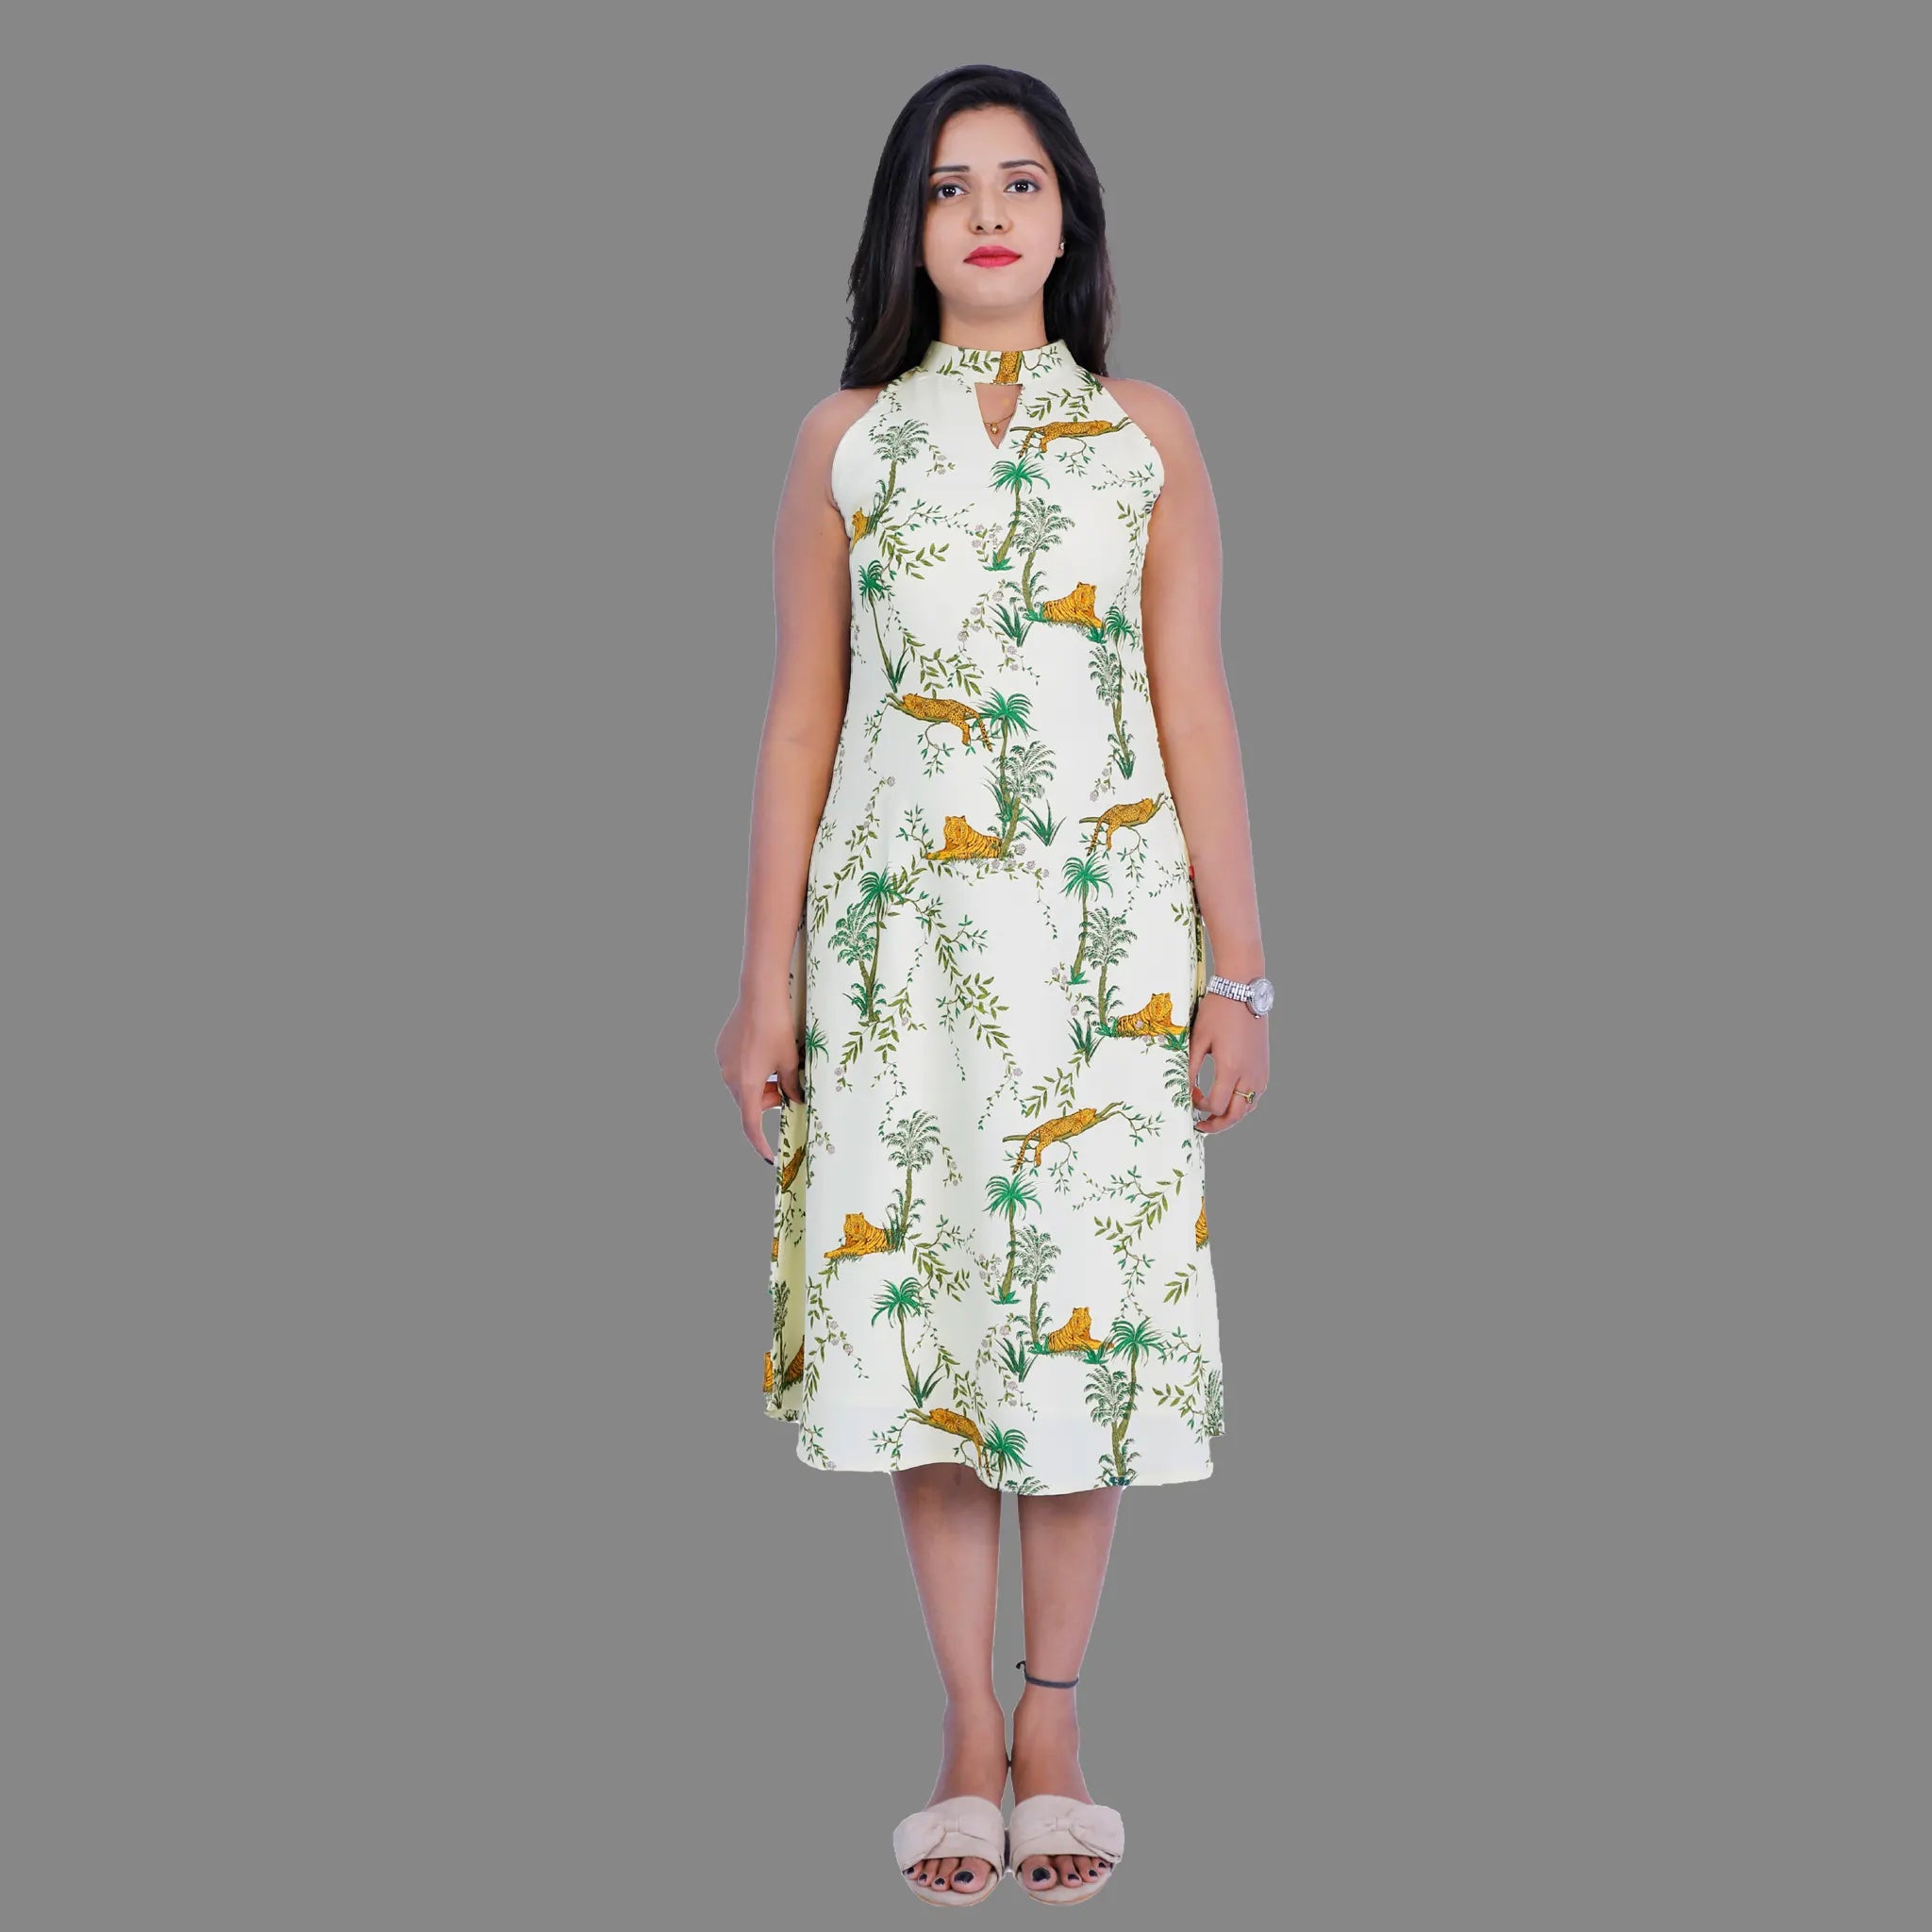 Ladies Western One Piece Dress at Best Price in Jaipur | Arohi Life Style